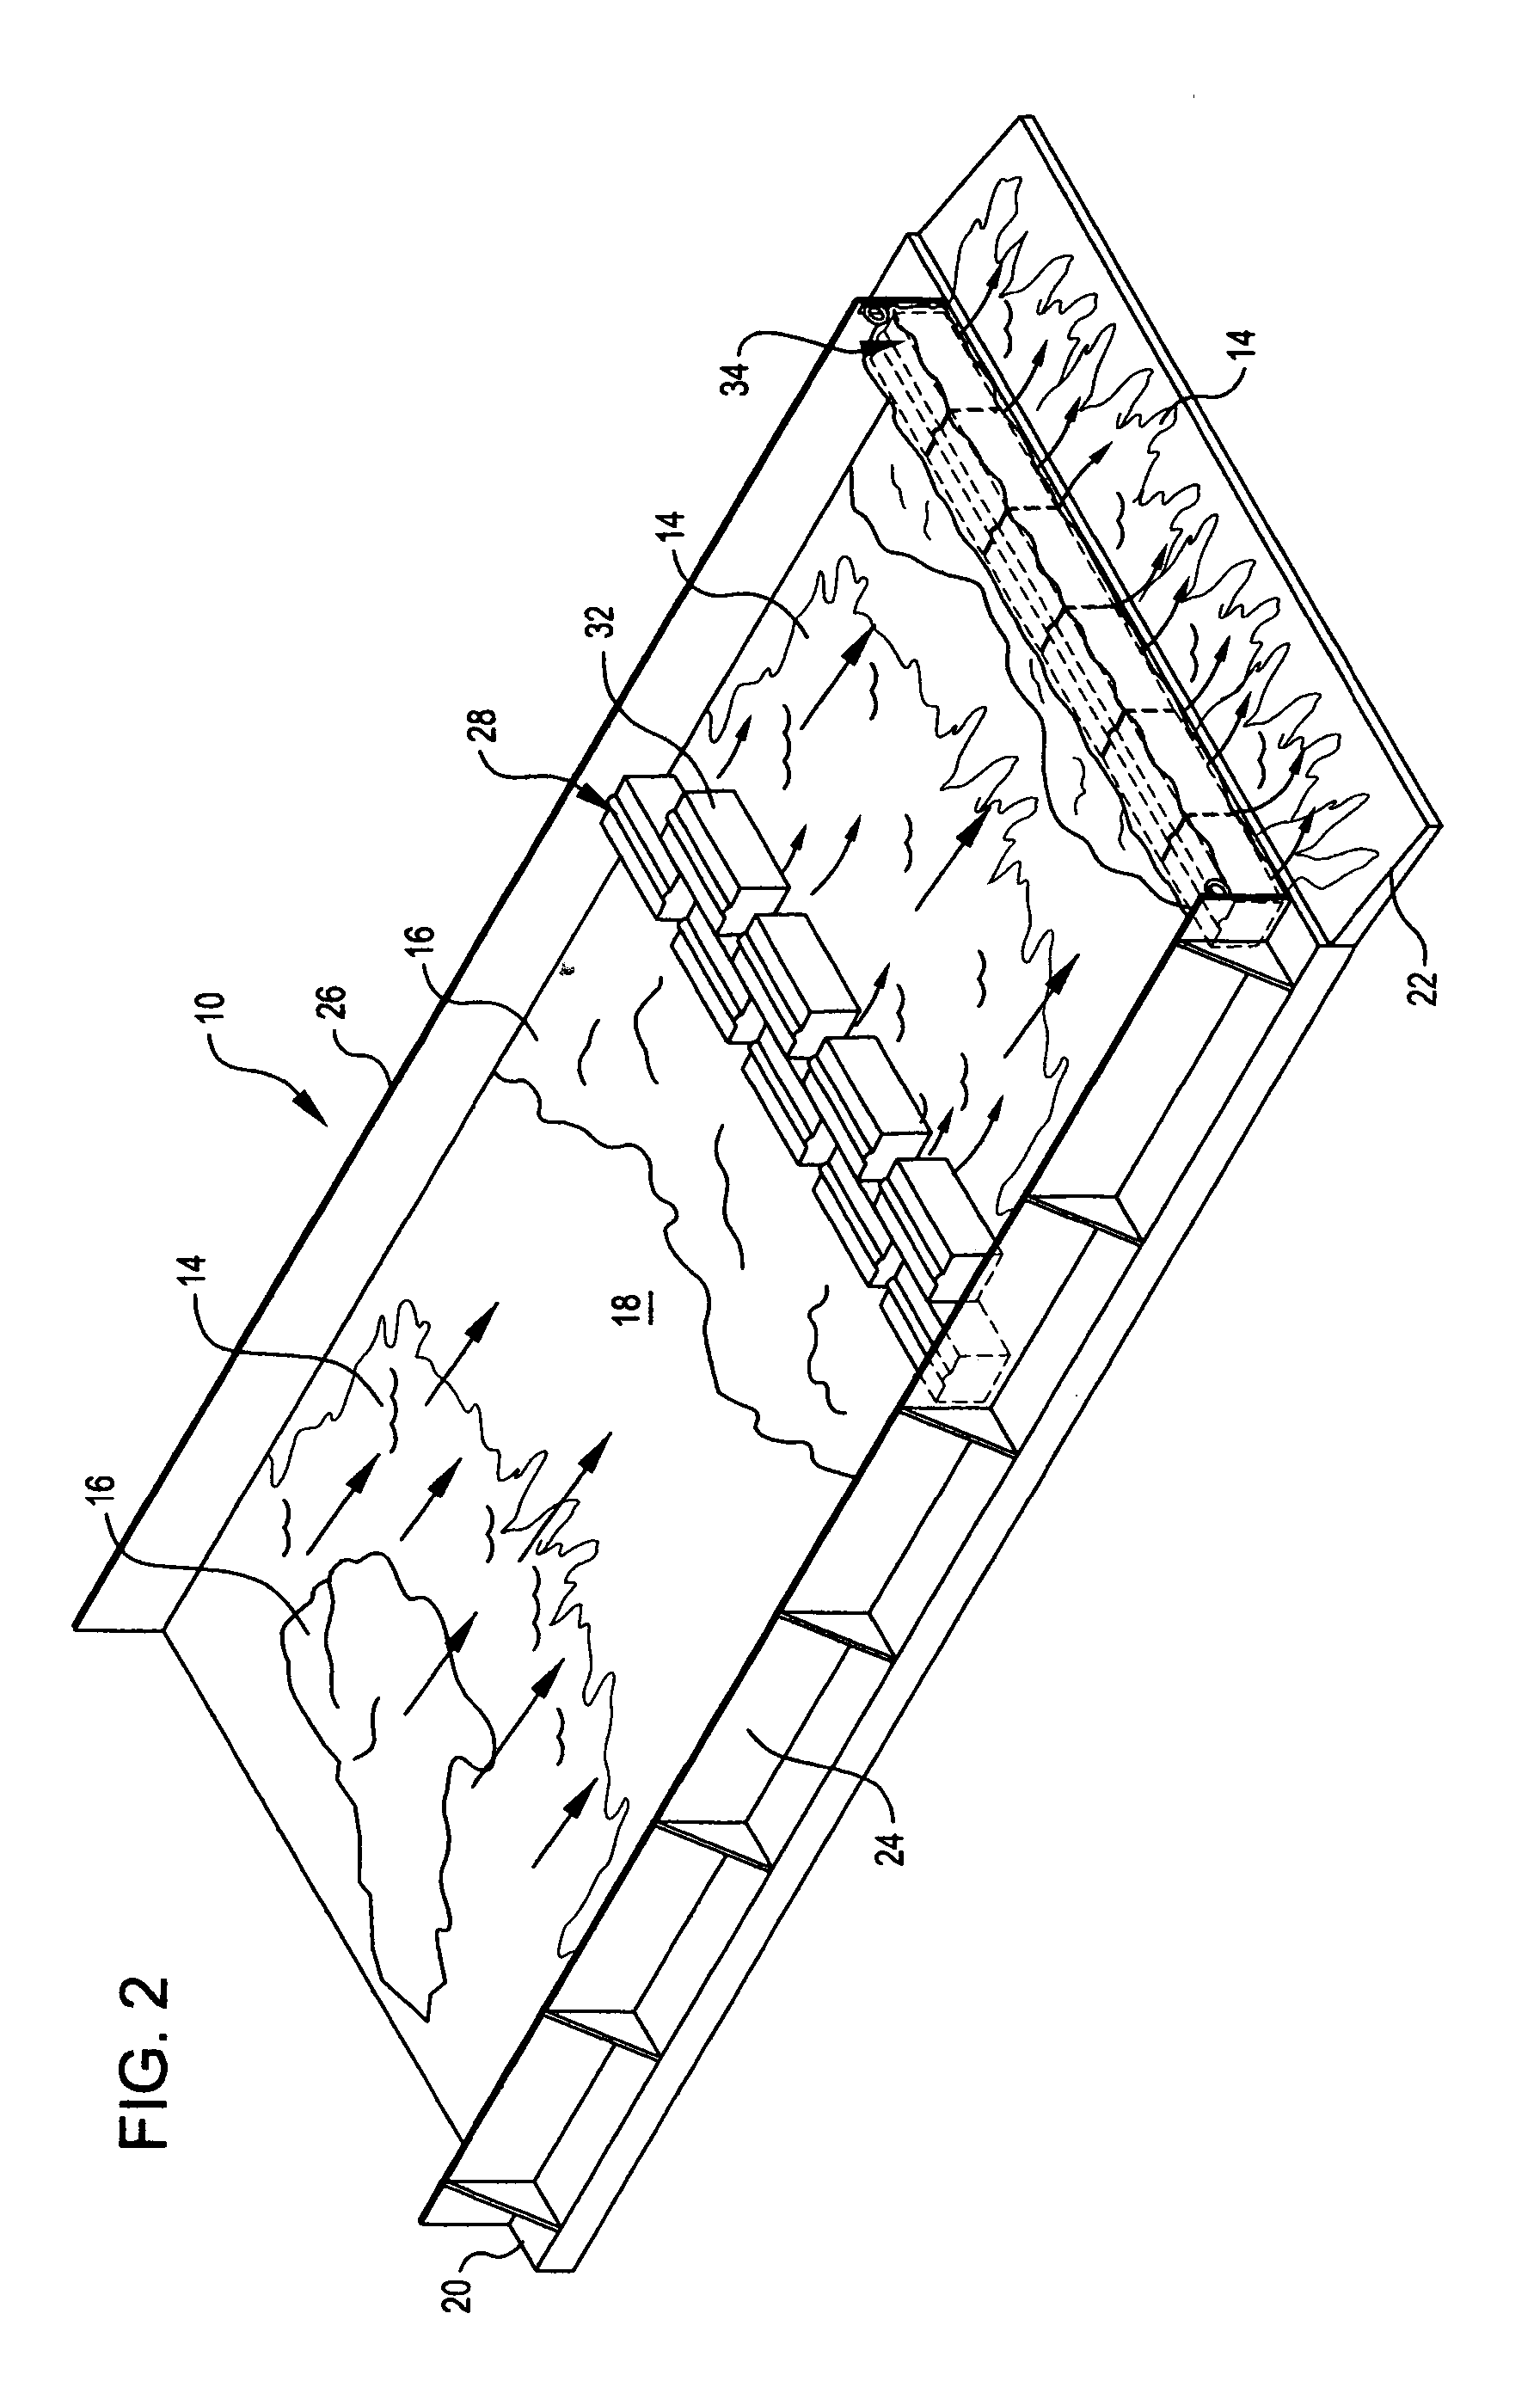 System and method of dewatering dredge spoils using sloping drain barge